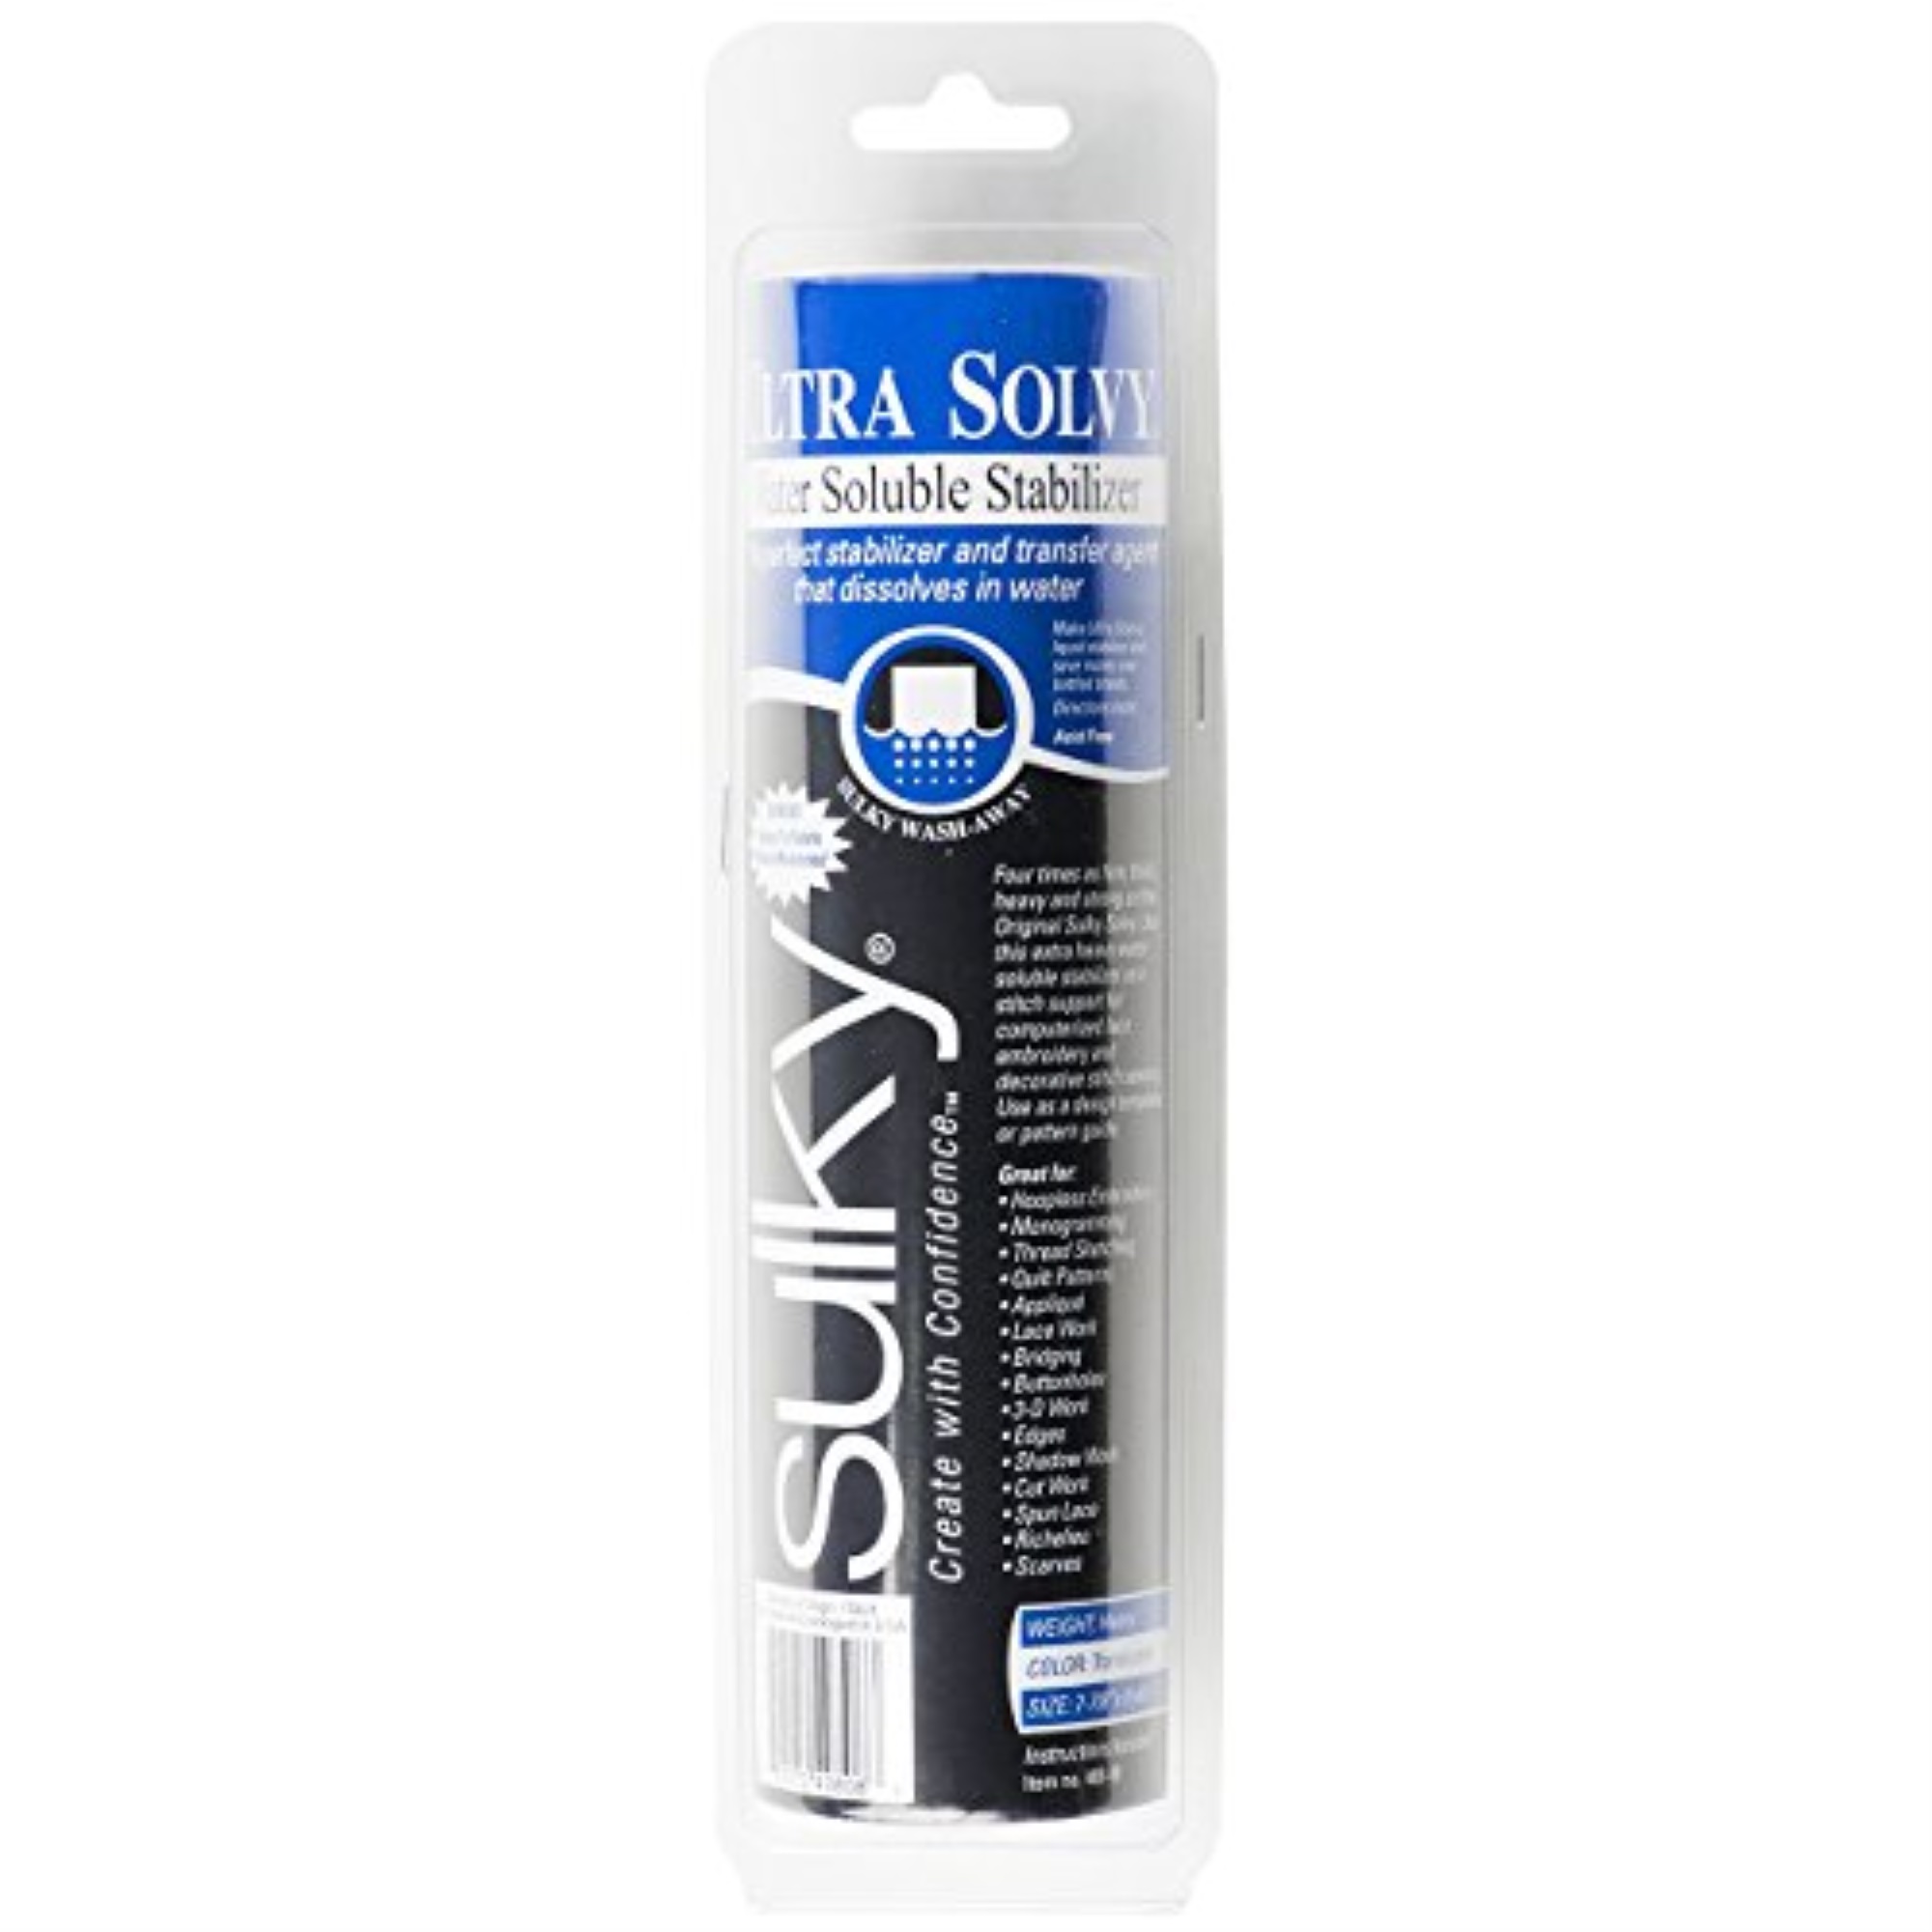 Sulky Of America Ultra Solvy Extremely Firm & Stable Water Soluble Stabilizer, 8" by 8 yd (408-08)